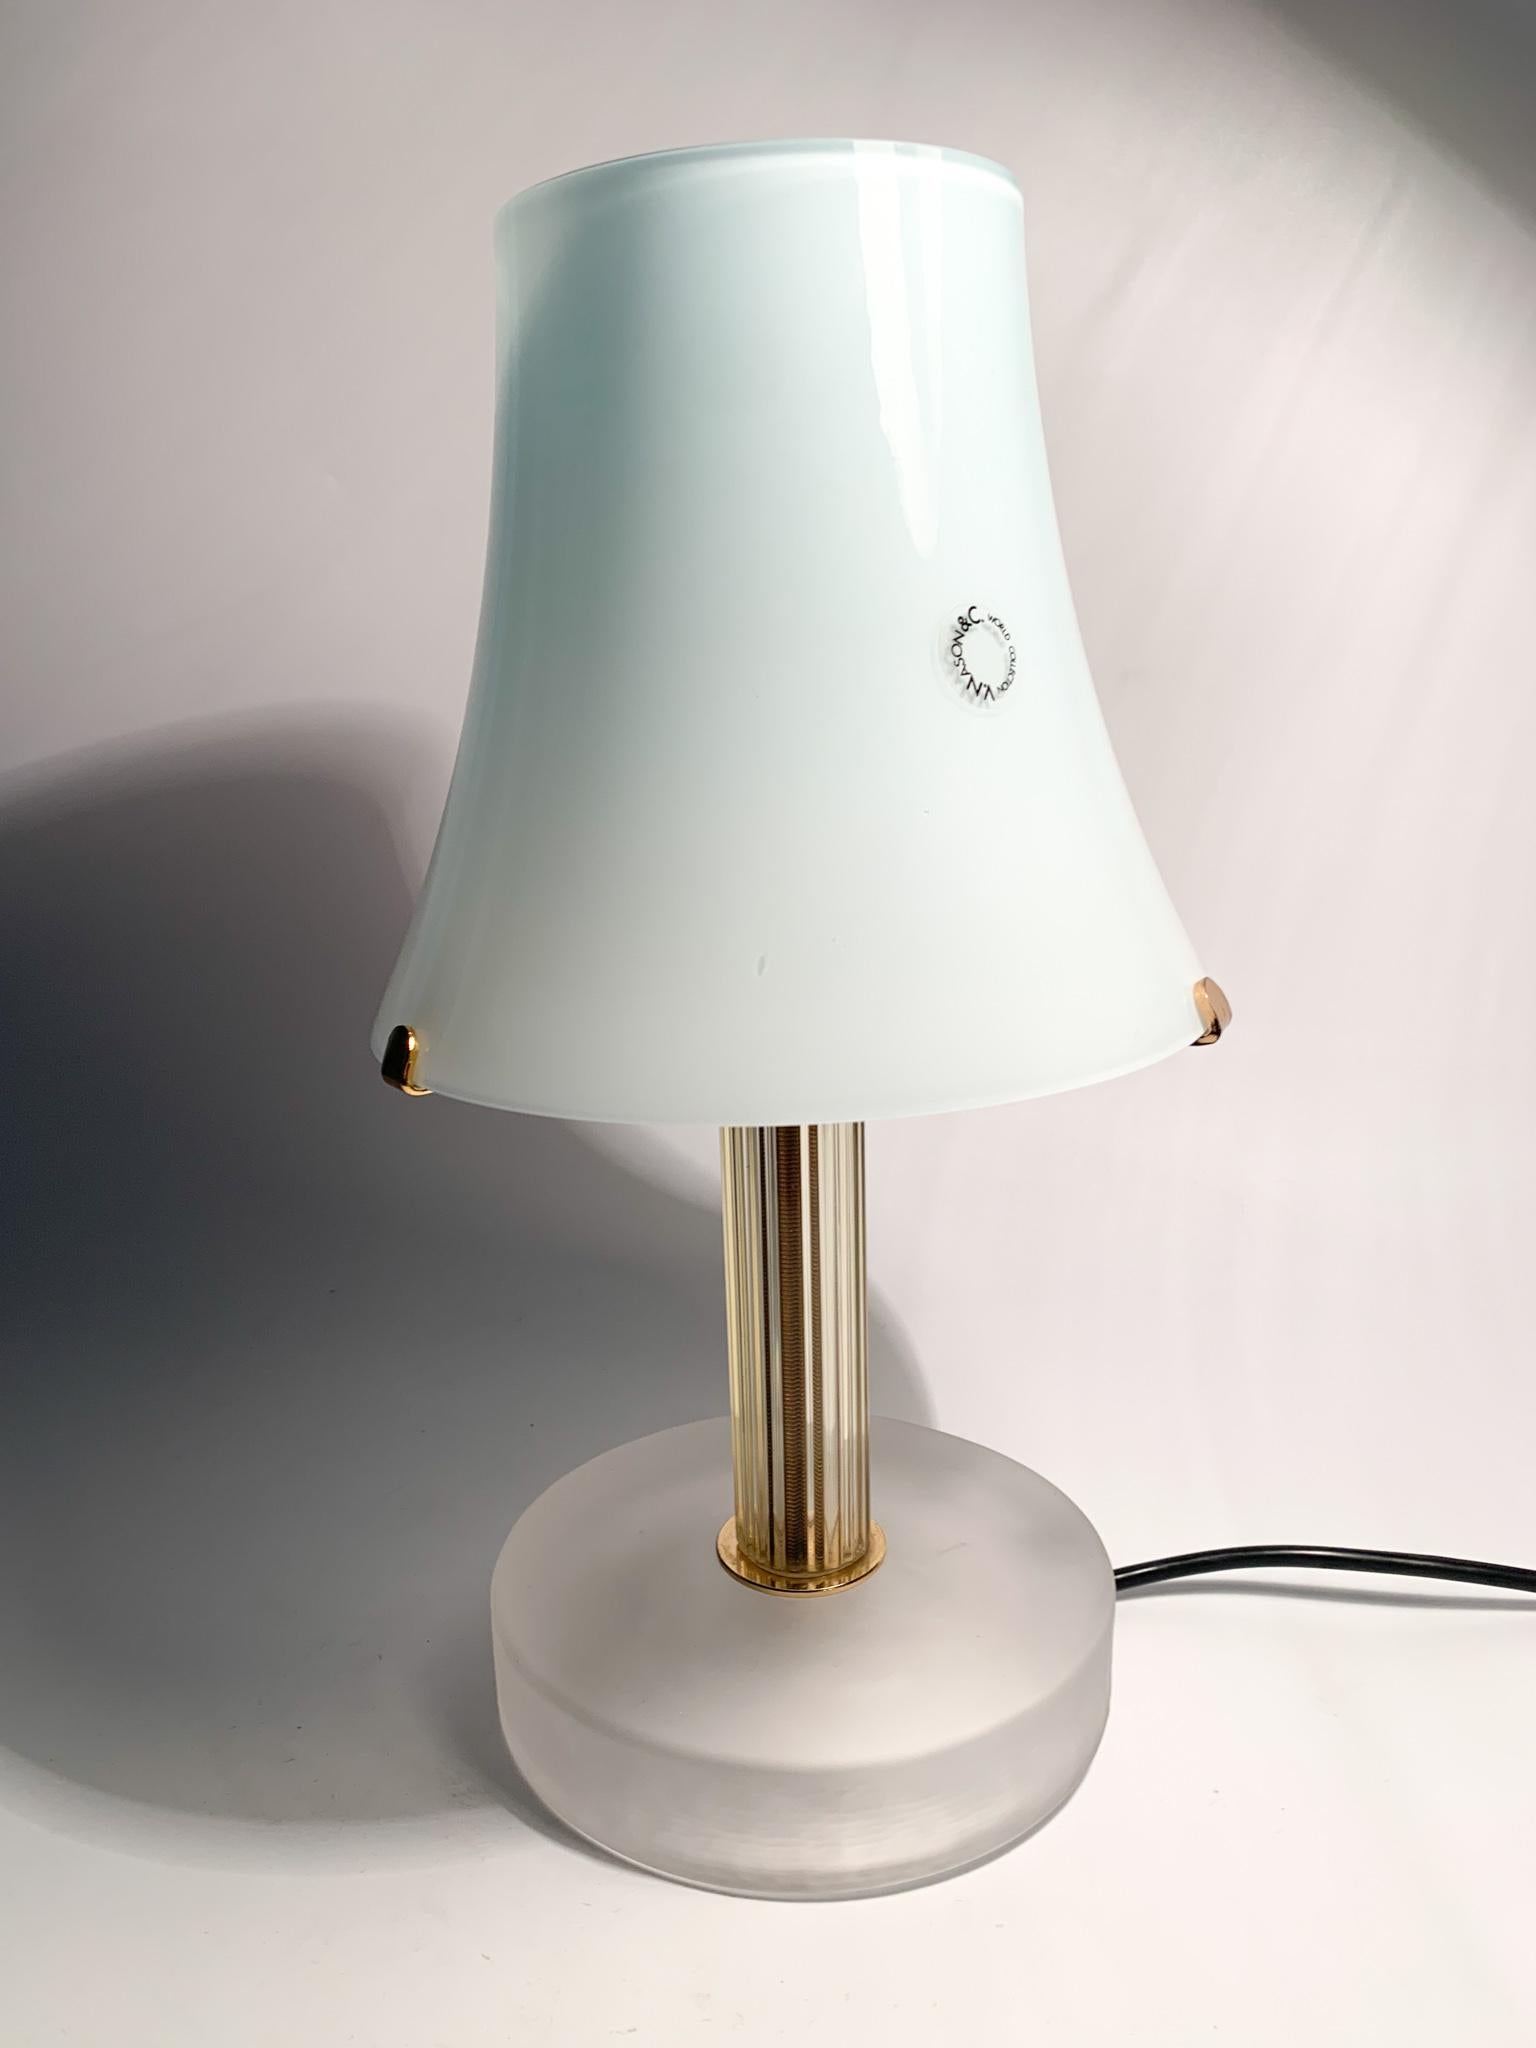 Murano glass table lamp by Nason, made in the 1980s. The lamp is composed of a pastel blue glass hat, a golden glass stem and an opaque white glass base. 

Ø cm 17 h cm 31

Carlo Nason, born in Murano in 1935 from one of the oldest families of